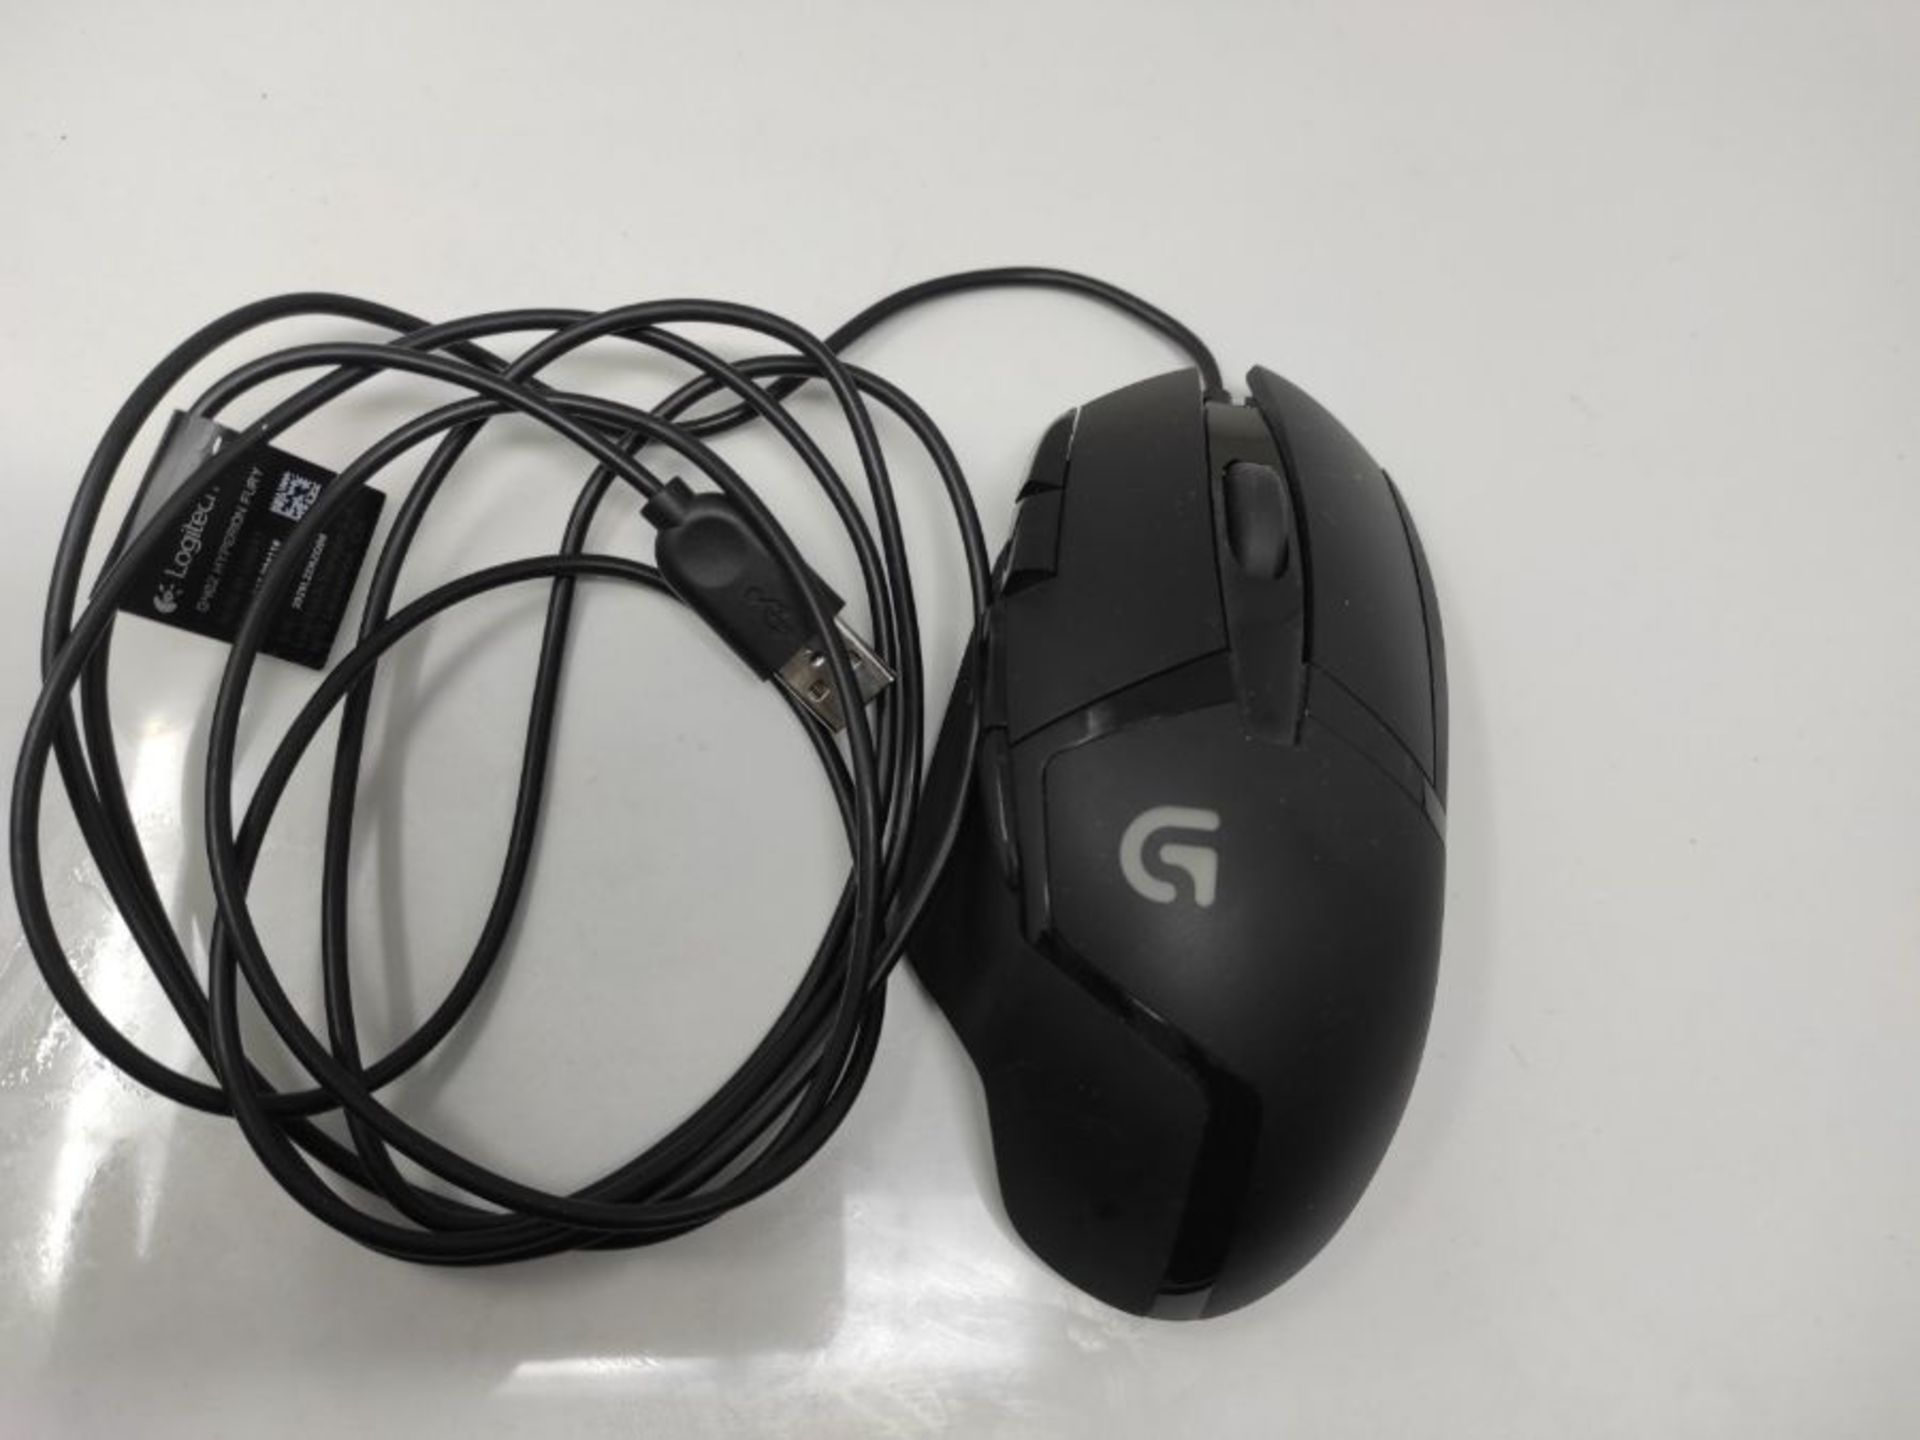 Logitech G402 Hyperion Fury Wired Gaming Mouse, 4,000 DPI, Lightweight, 8 Programmable - Image 2 of 2